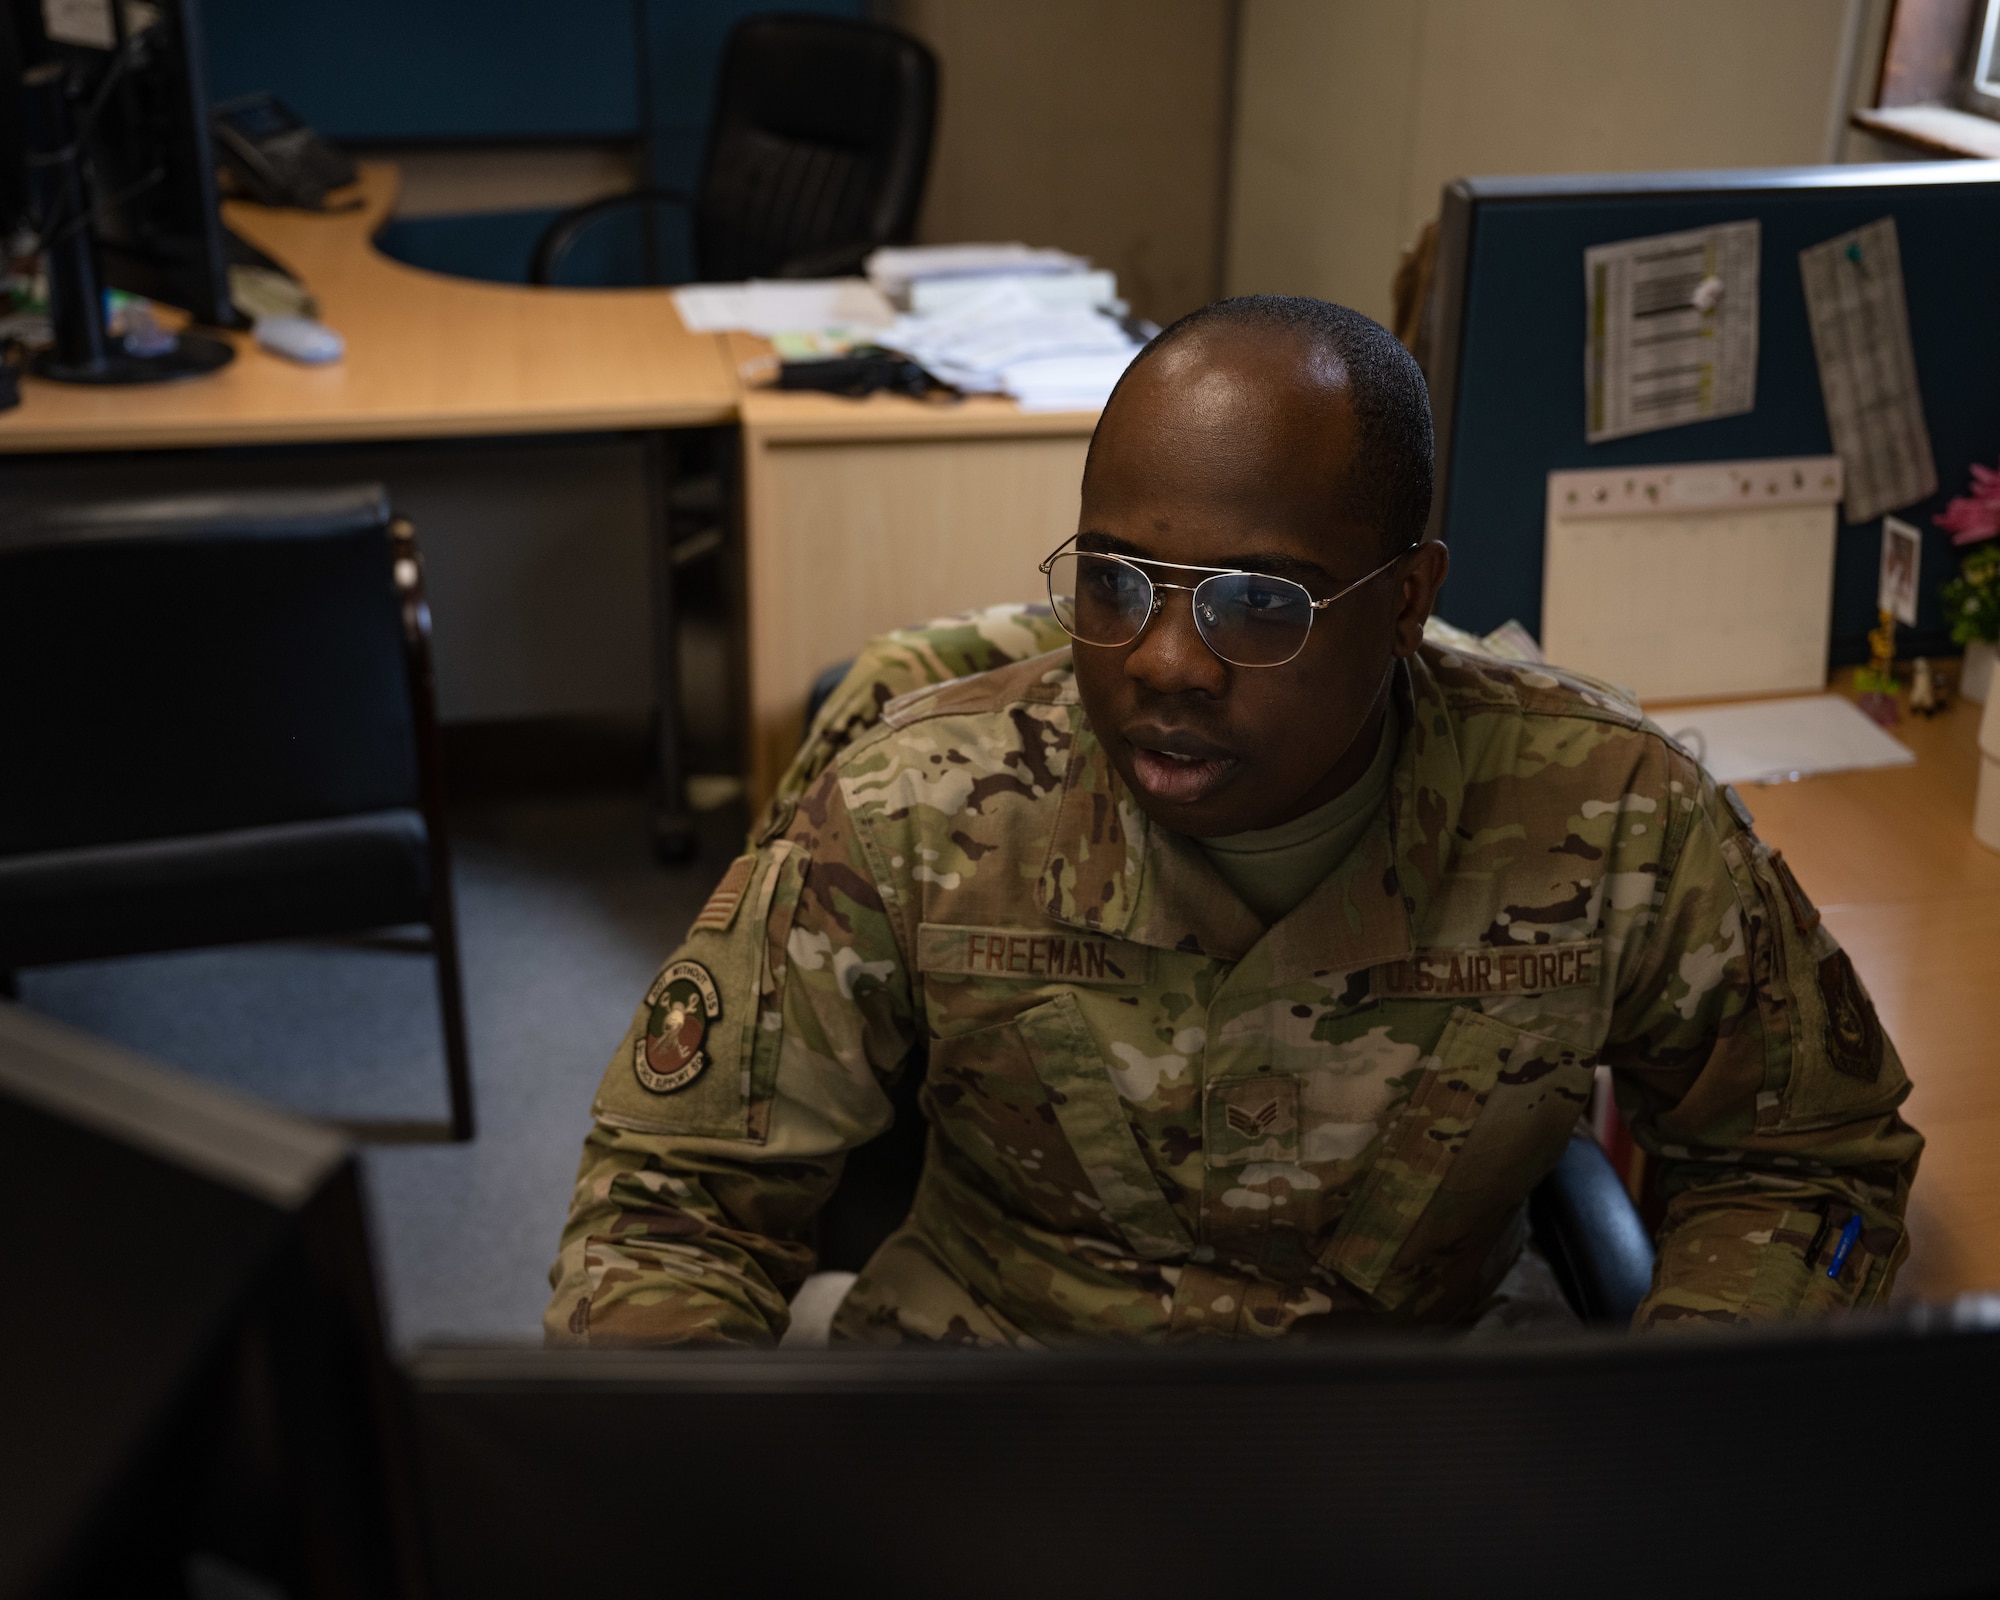 Senior Airman Bernard Freeman, 8th Force Support Squadron personnel systems manager, reviews personnel records at Kunsan Air Base, Republic of Korea.